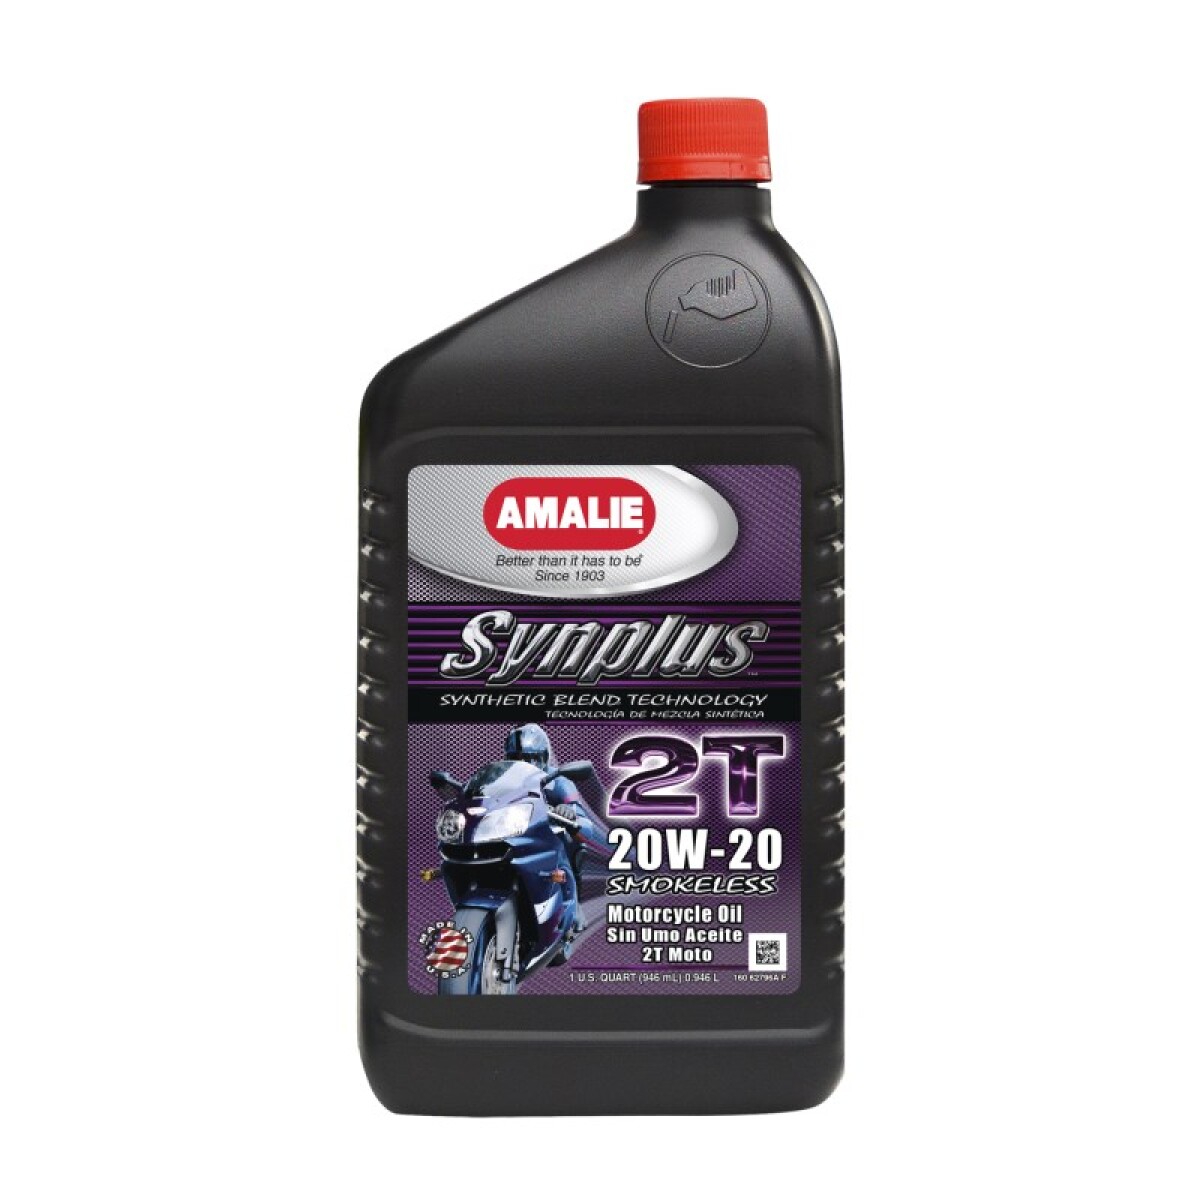 LUBRICANTE ACEITES - 20W20 1LTS SYNPLUS 2T AMALIE MOTOR OIL 